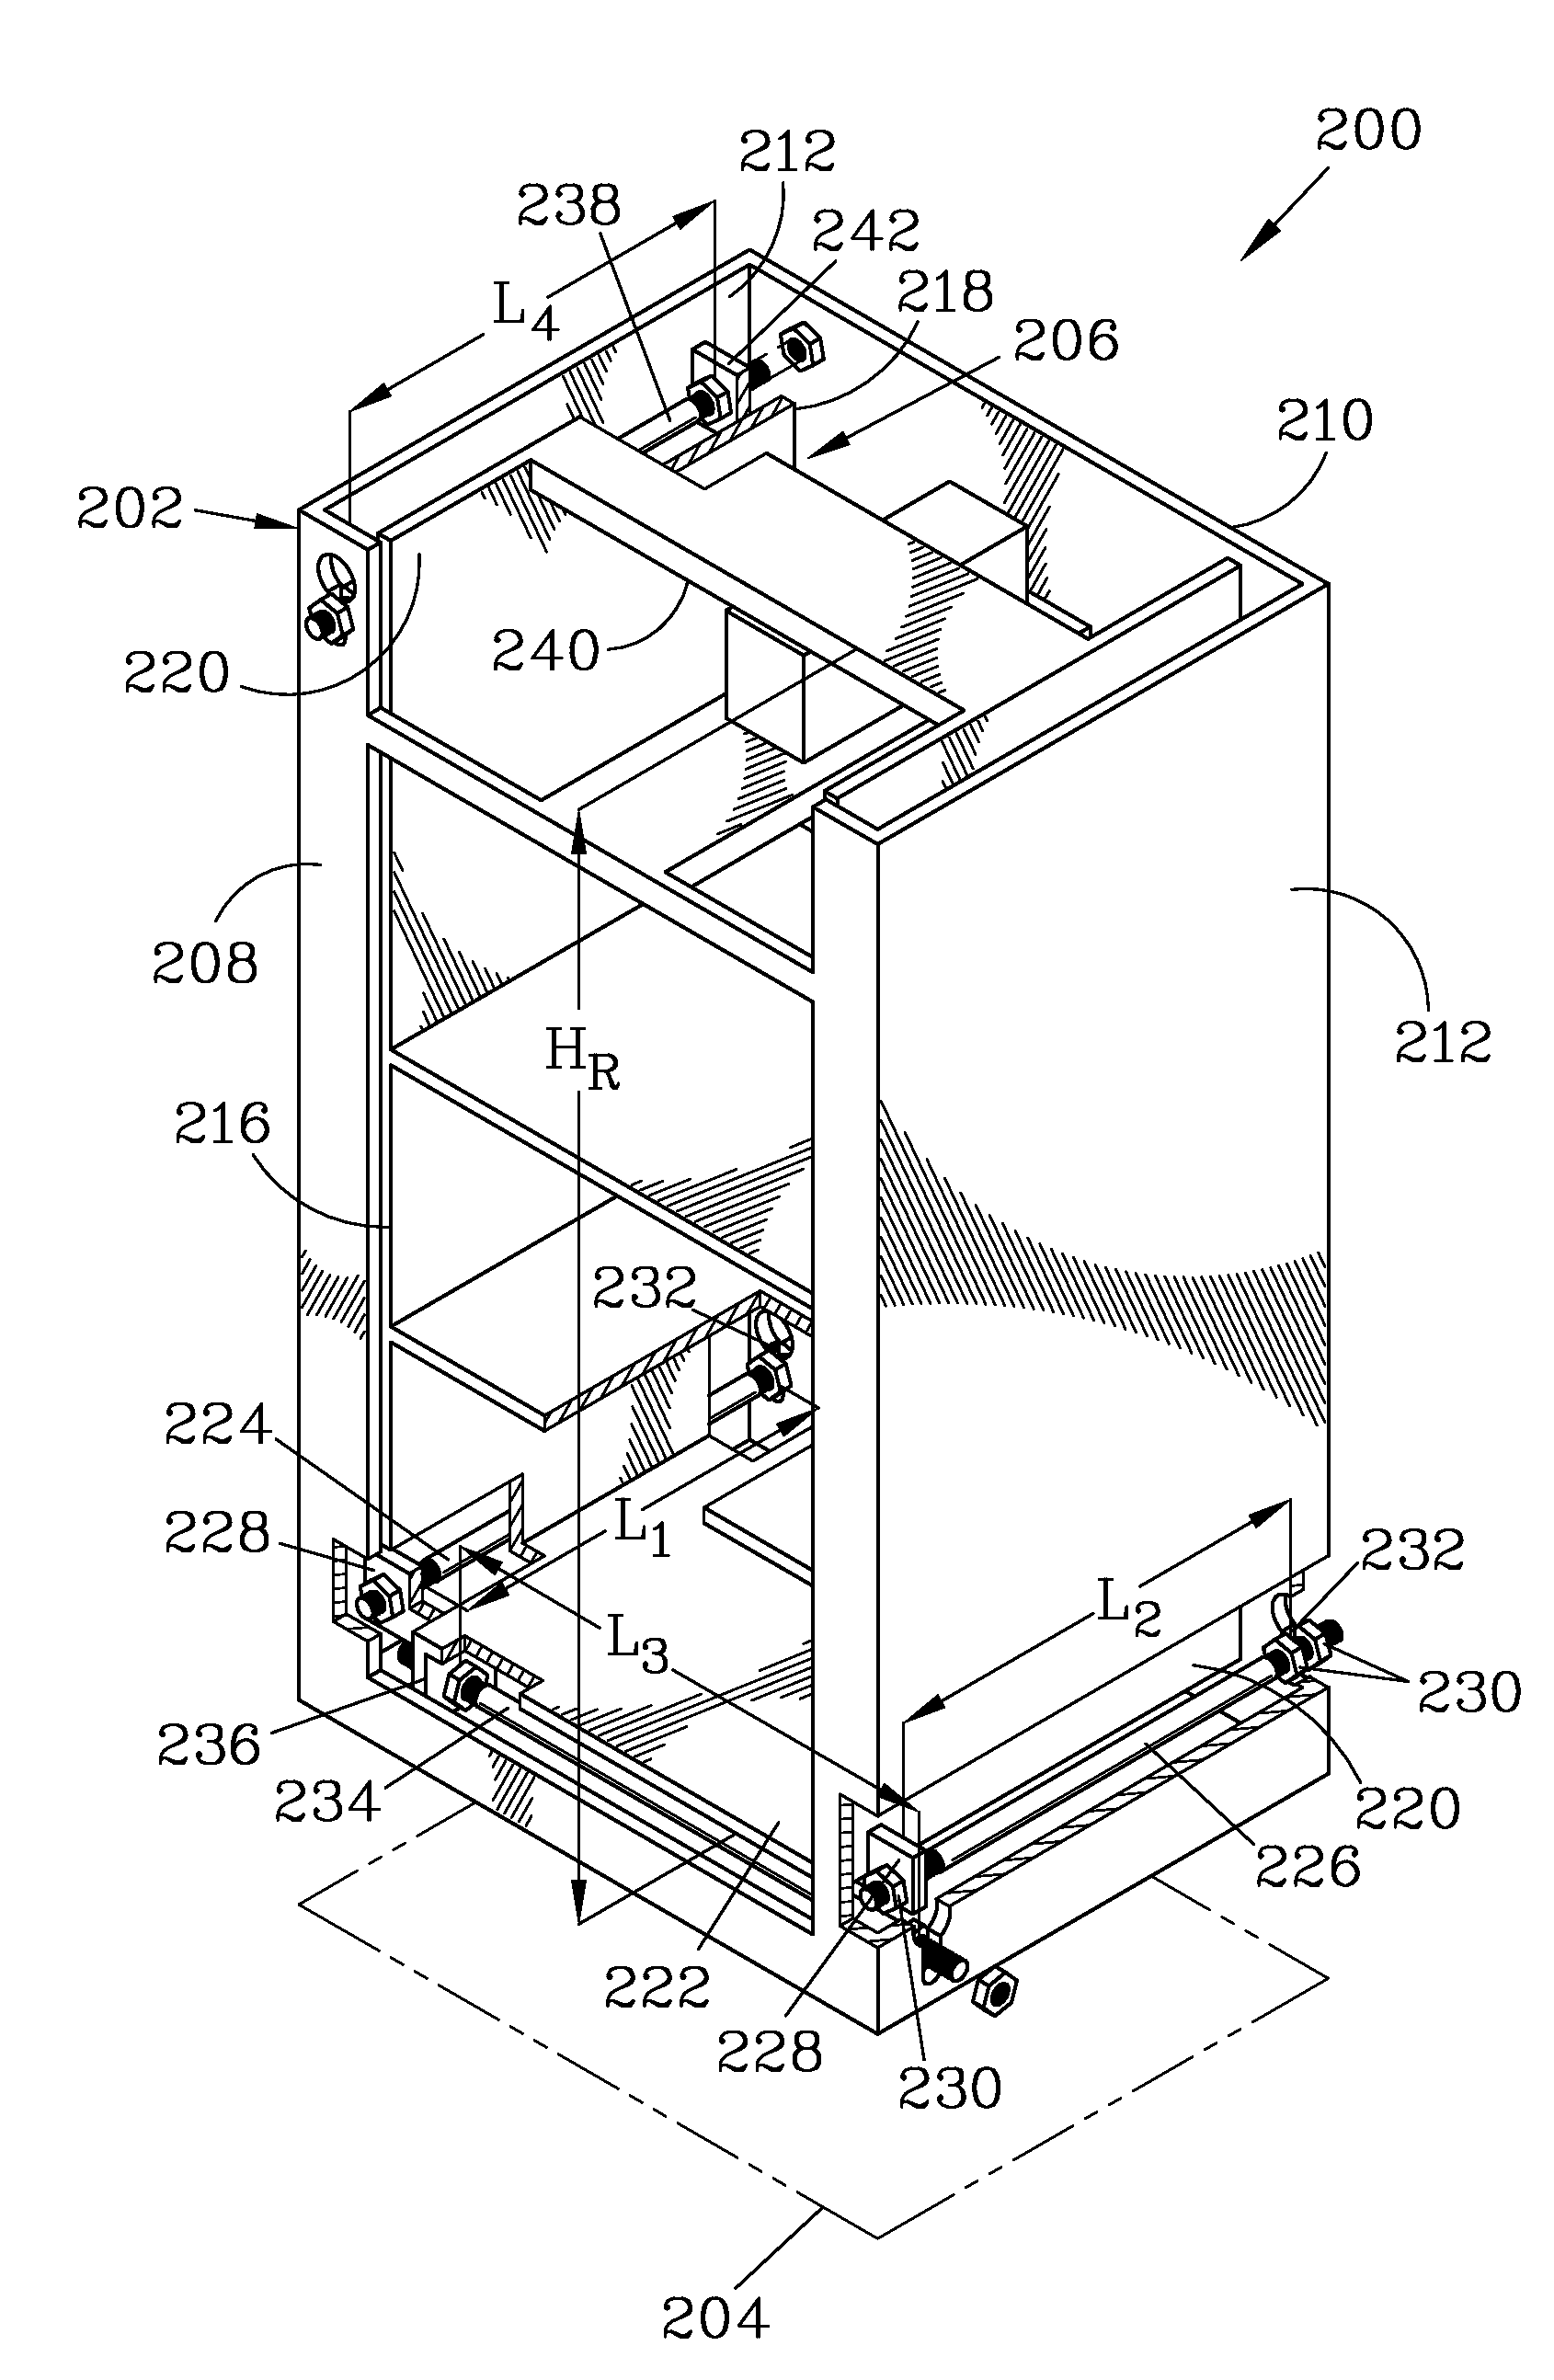 Shelving system for use with load cell